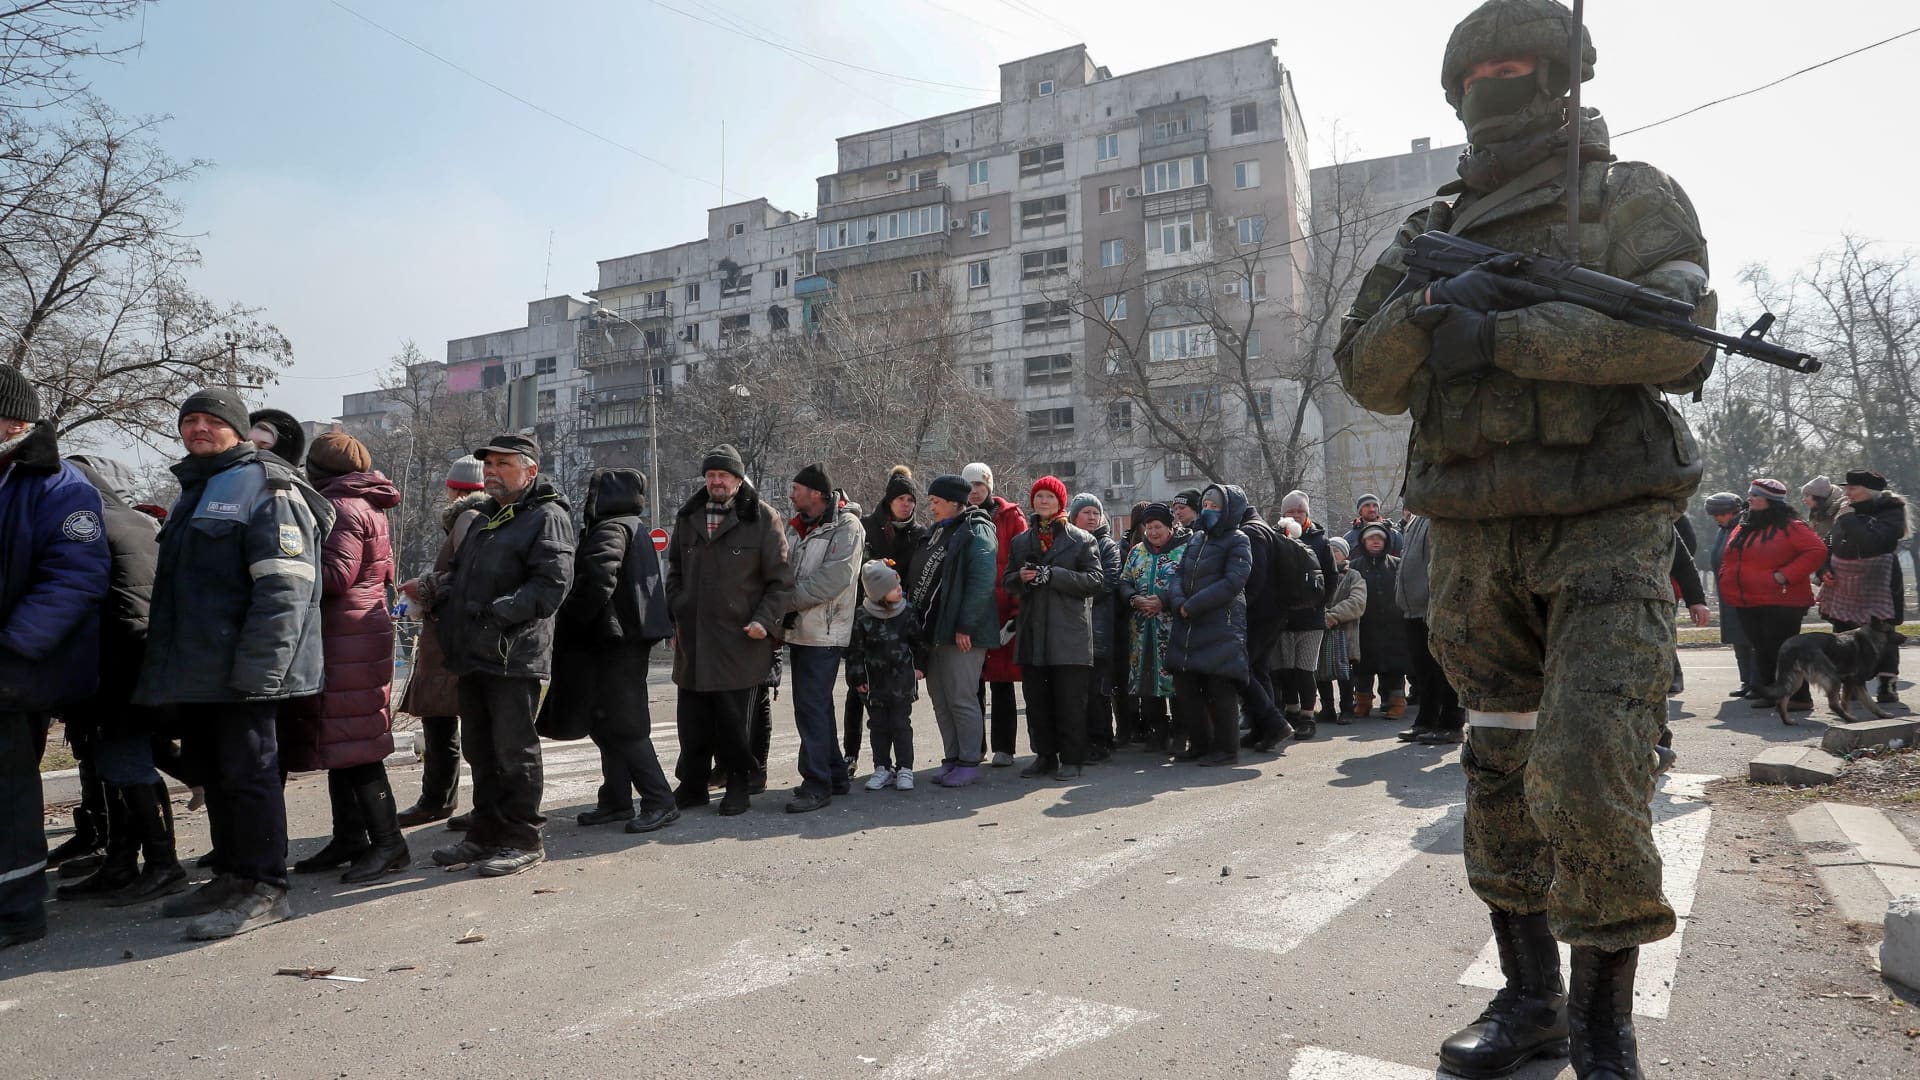 A Russian army soldier stands next to local residents who queue for humanitarian aid delivered during Ukraine-Russia conflict, in the besieged southern port of Mariupol, Ukraine March 23, 2022.